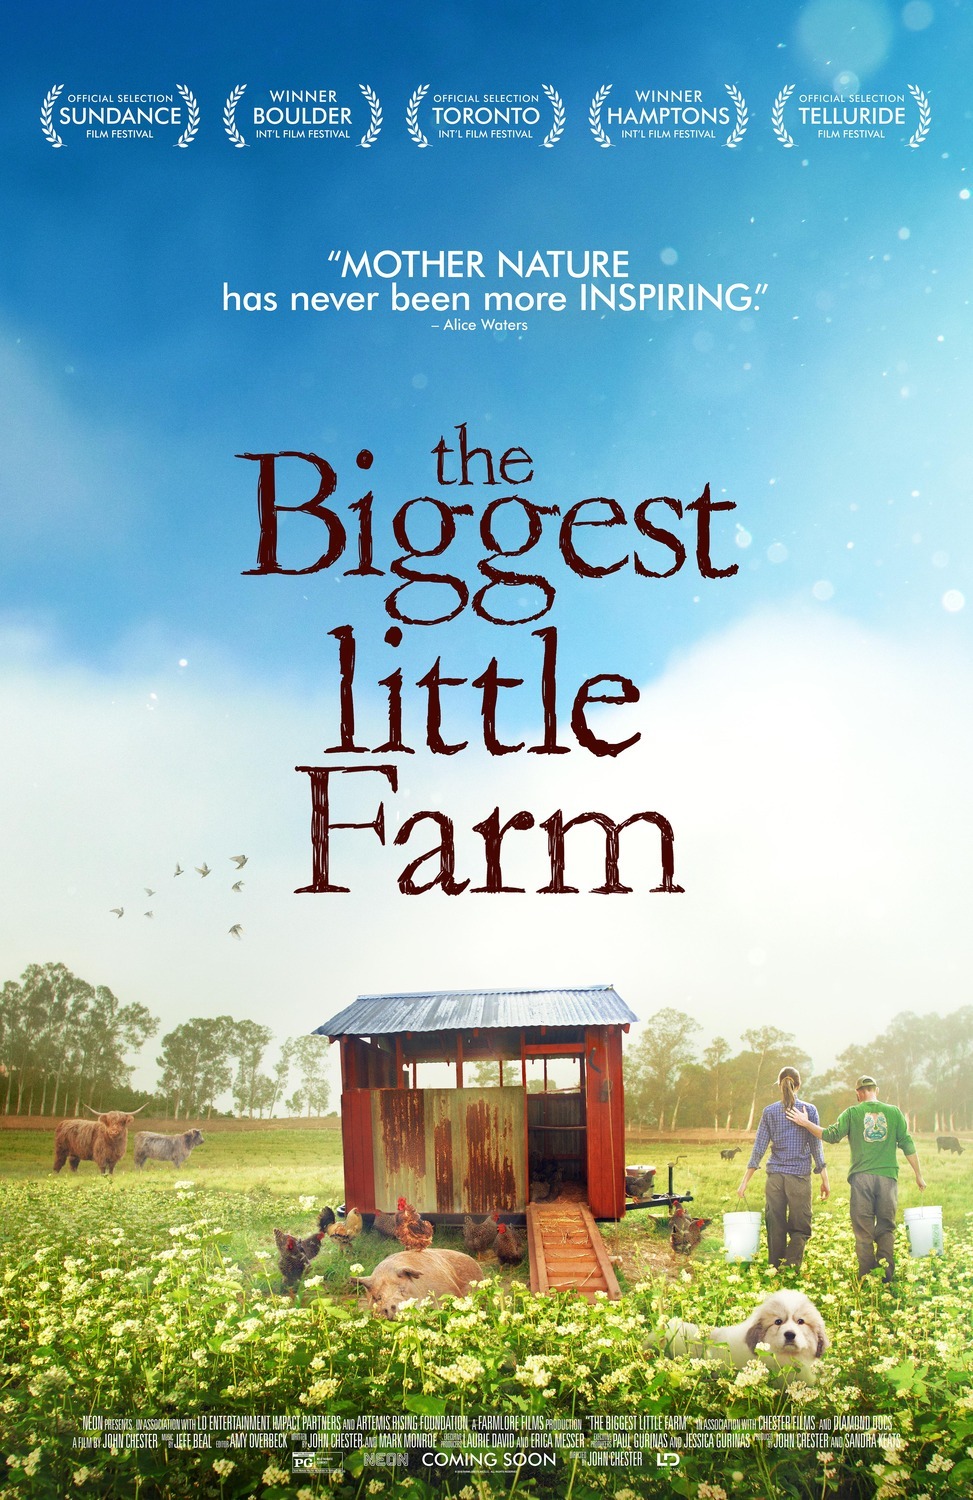 "The Biggest Little Farm" movie poster